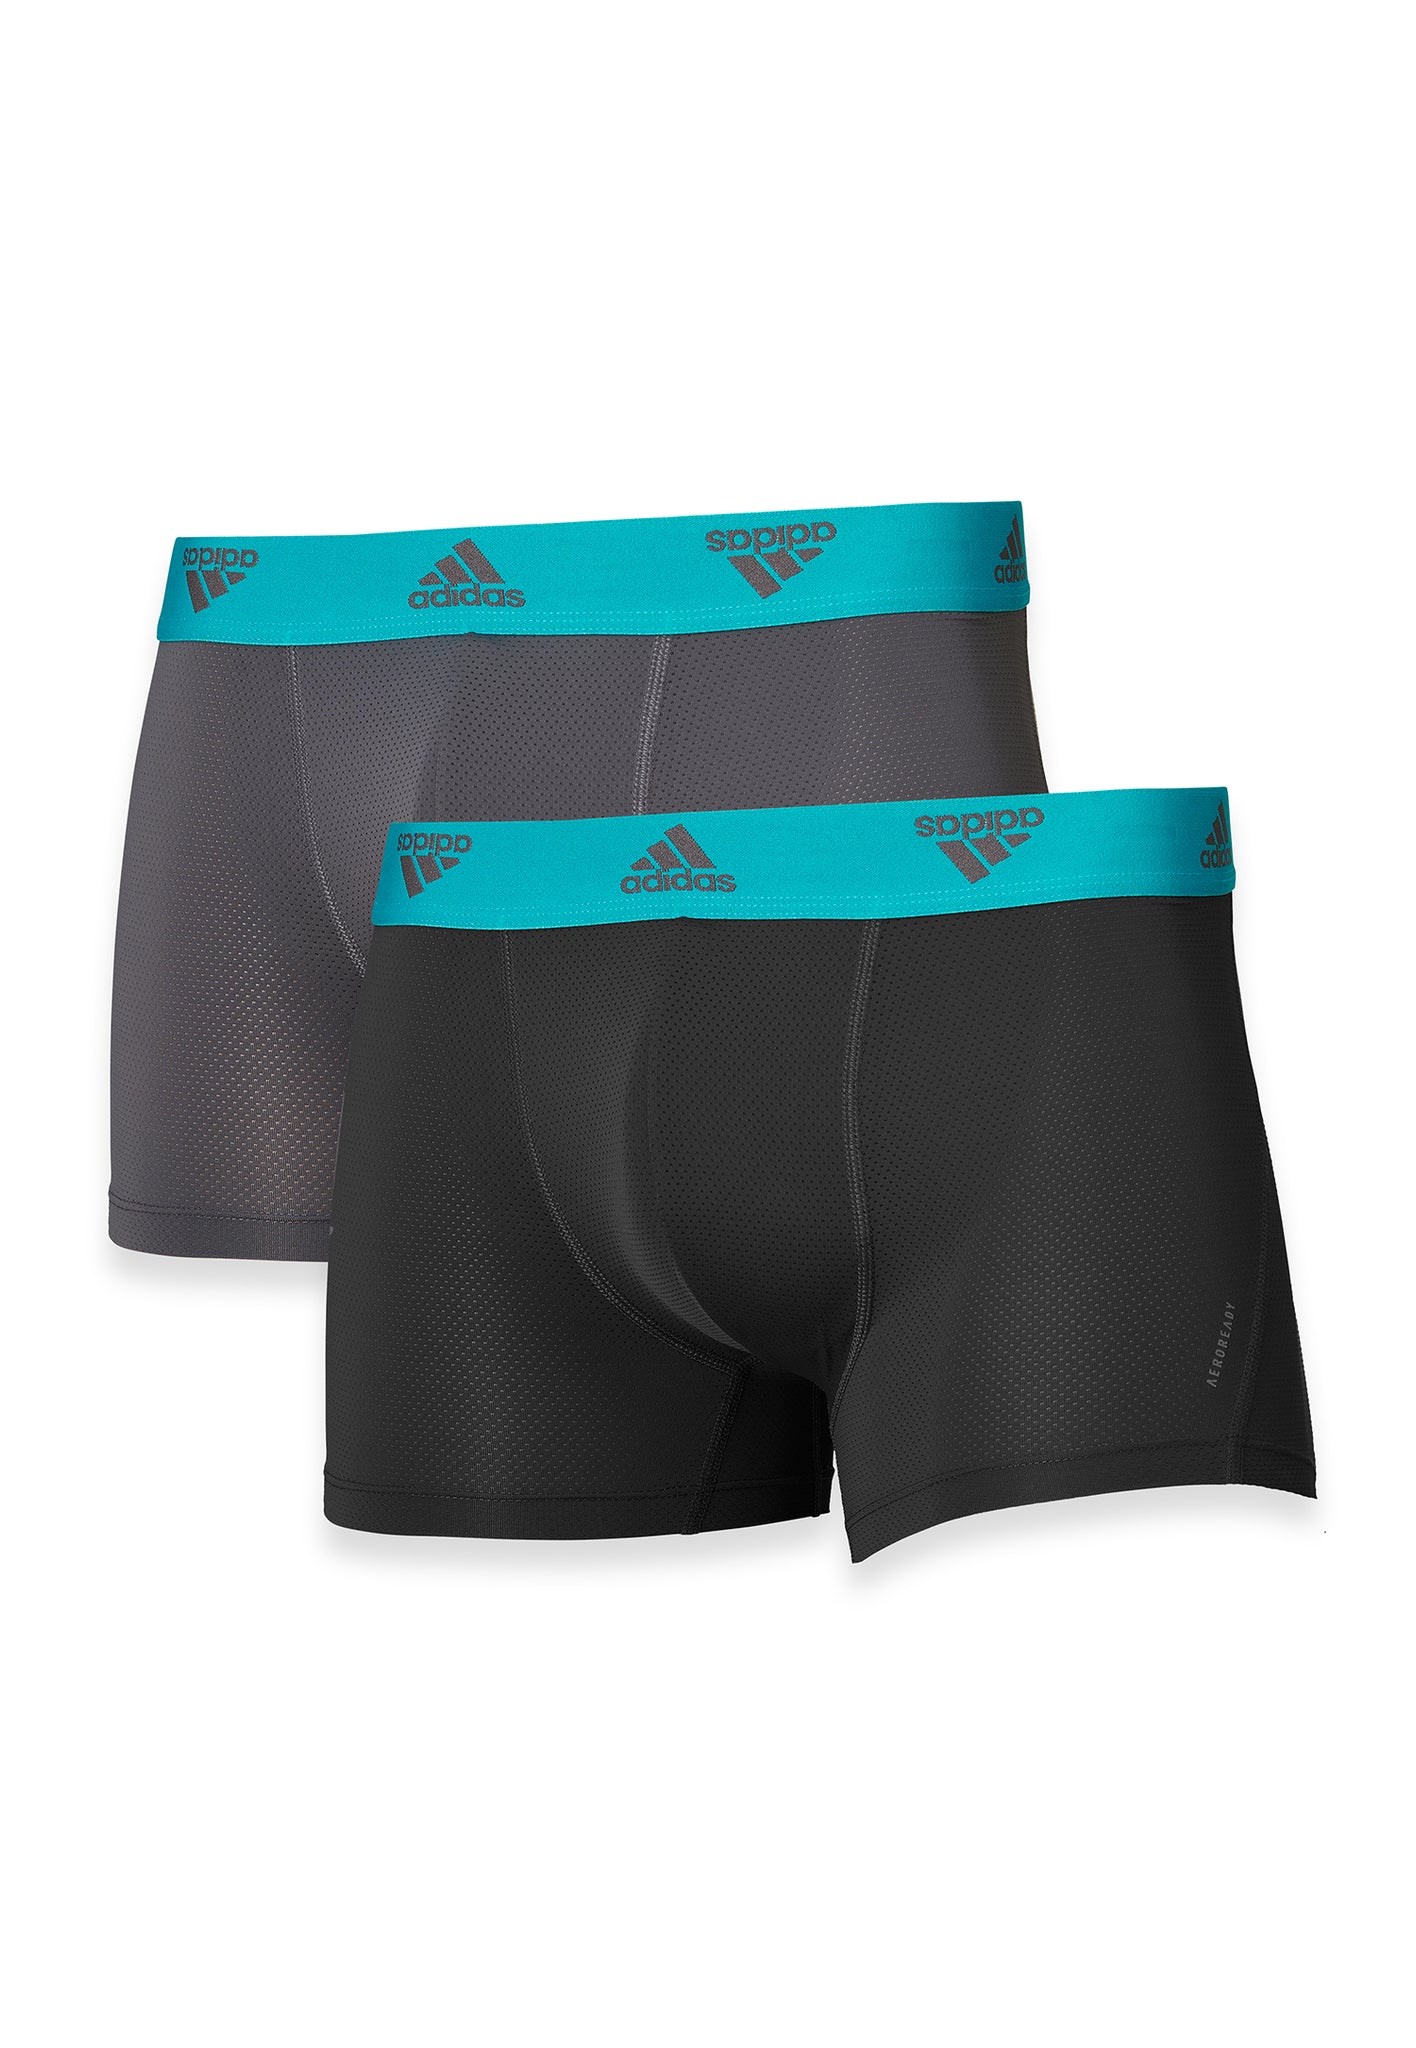 Adidas Climacool Boxer Brief Micro Mesh Underwear (2 Pack) – City